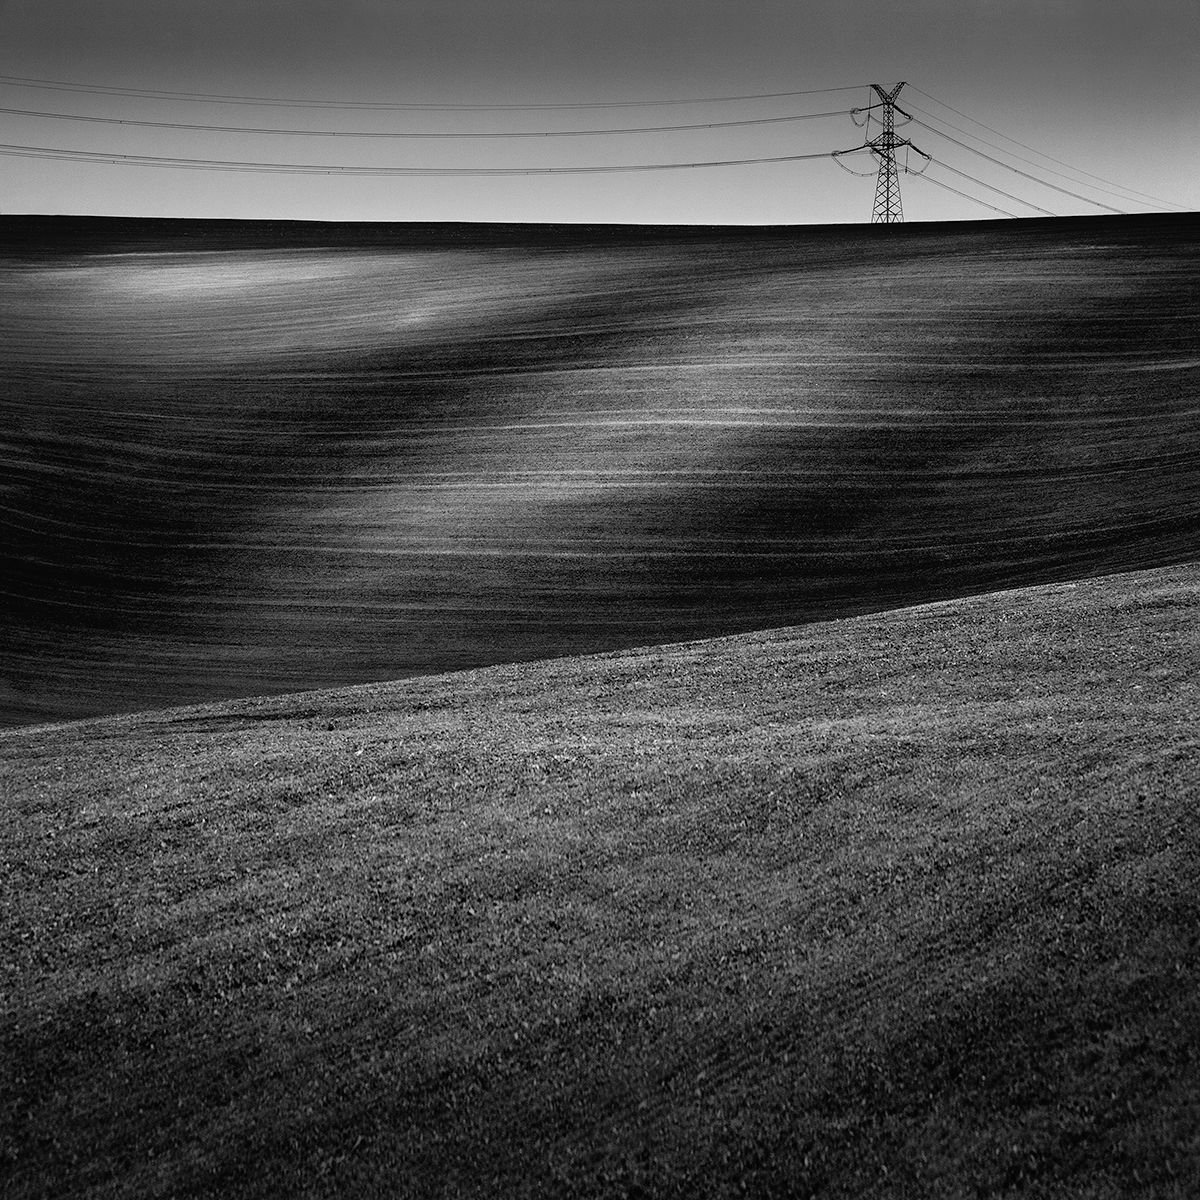 Landscape with energy by Tomasz Grzyb